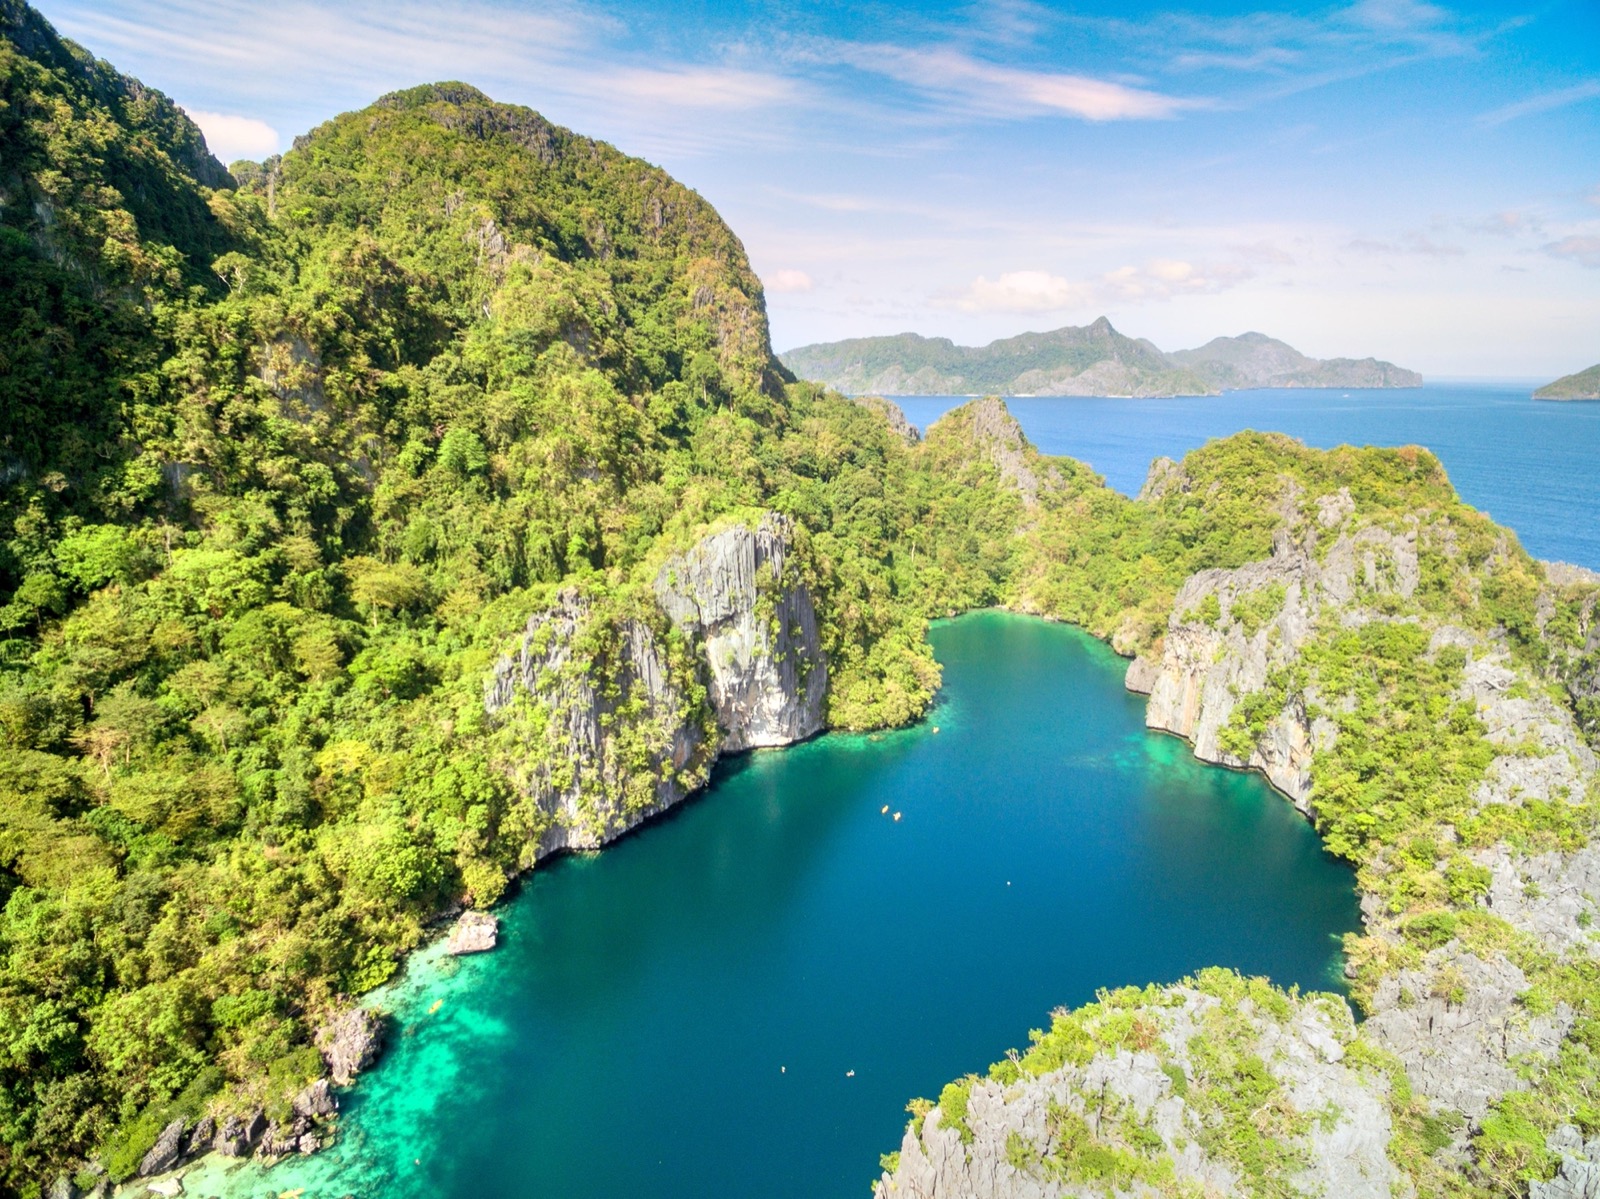 Do You Have the Smarts to Pass This World Geography Quiz With Flying Colors 🌈? Palawan Island, Philippines